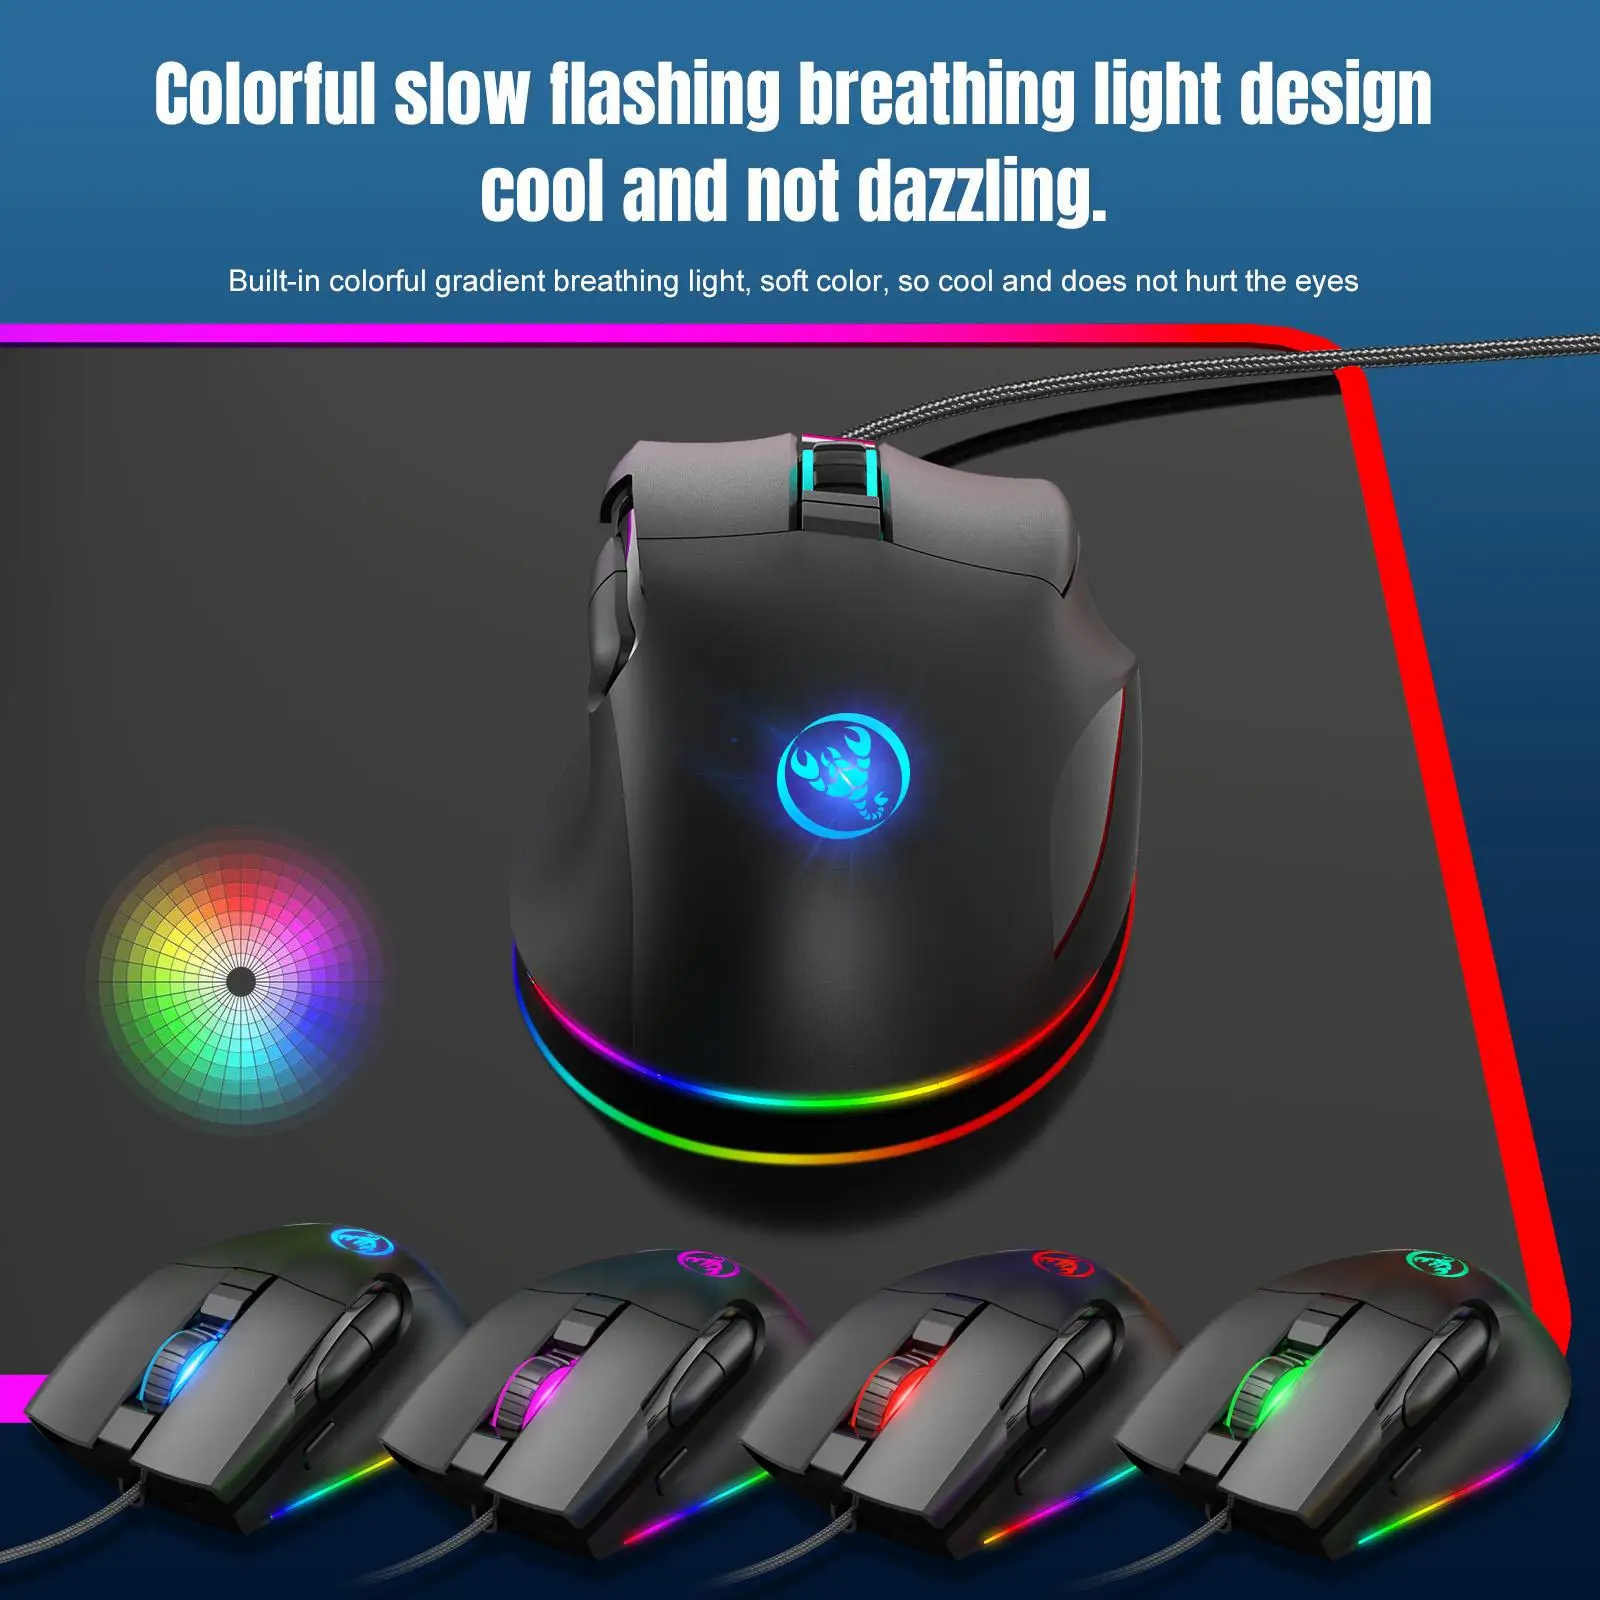 8D Gaming Mouse 200 DPI 8 Buttons 13 Backlits Computer Mouse for Laptop for 7 Right or Left Hand Use Black